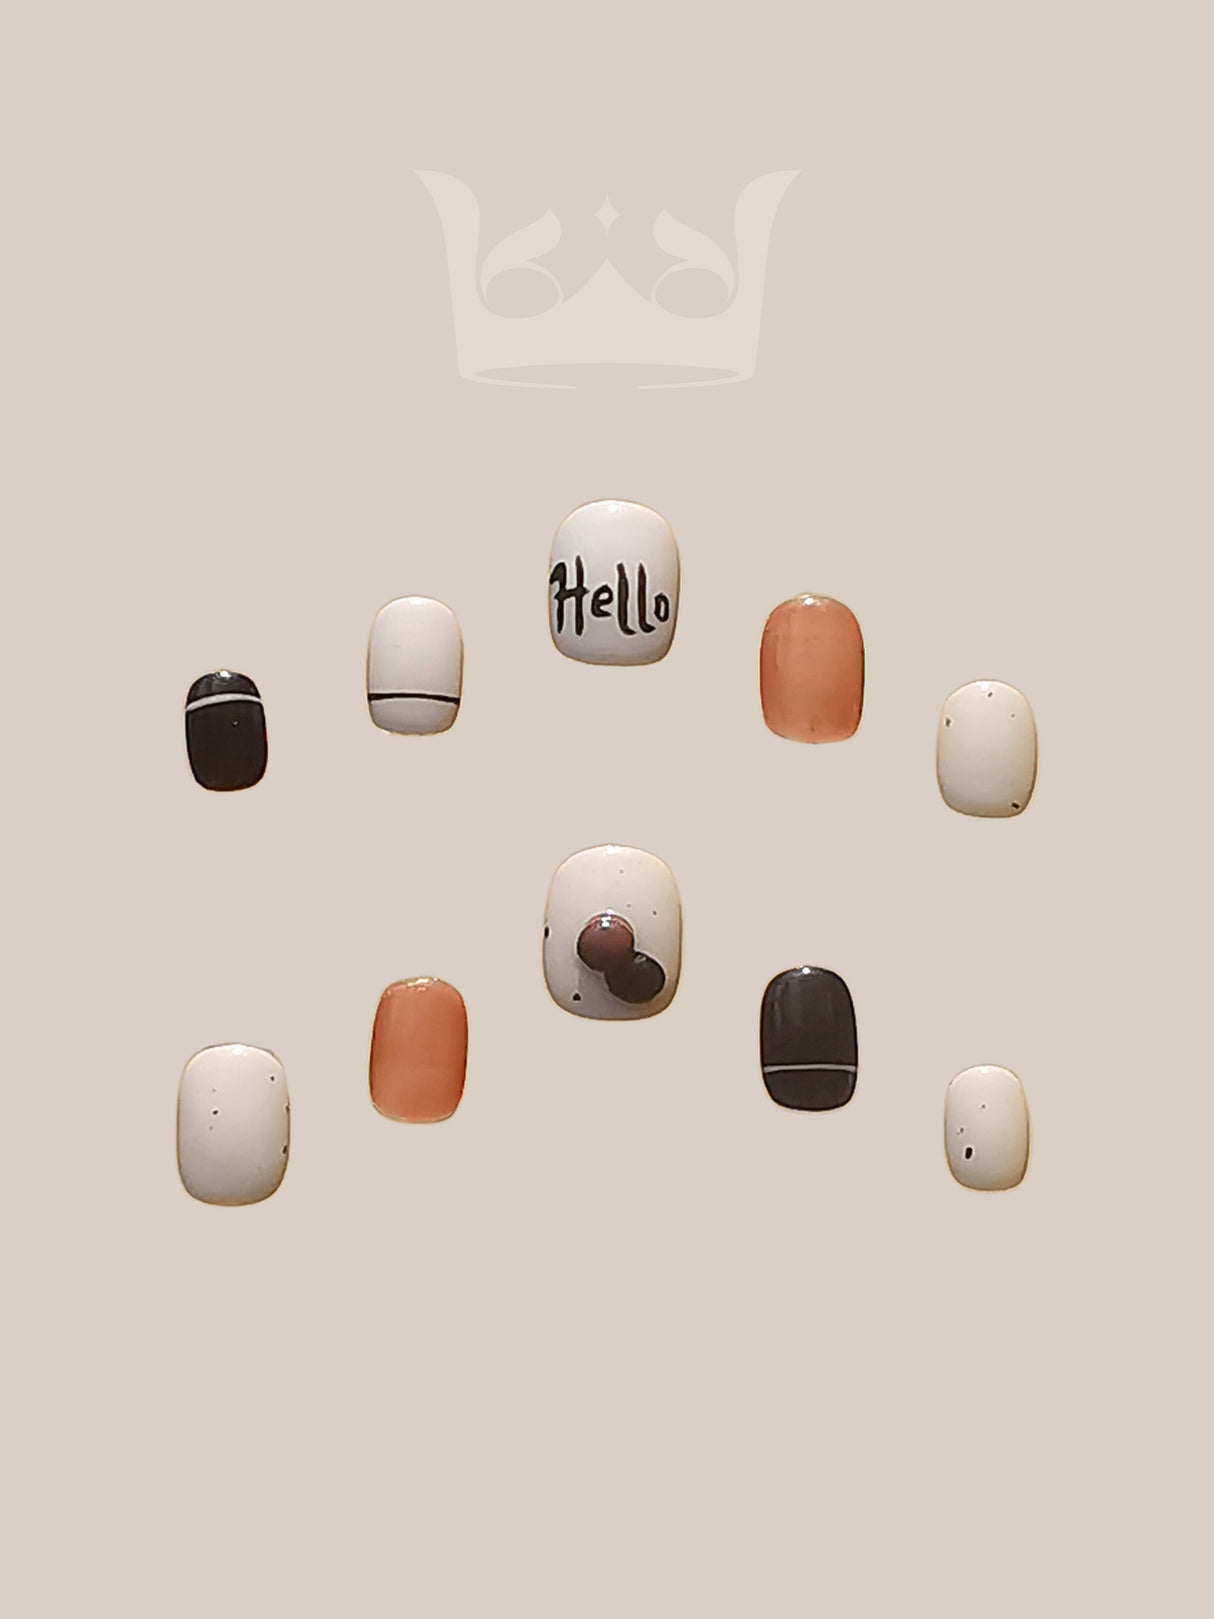 These press-on nails are designed for personal fashion and self-expression, suitable for casual or formal events. They feature minimalist designs with playful touches.